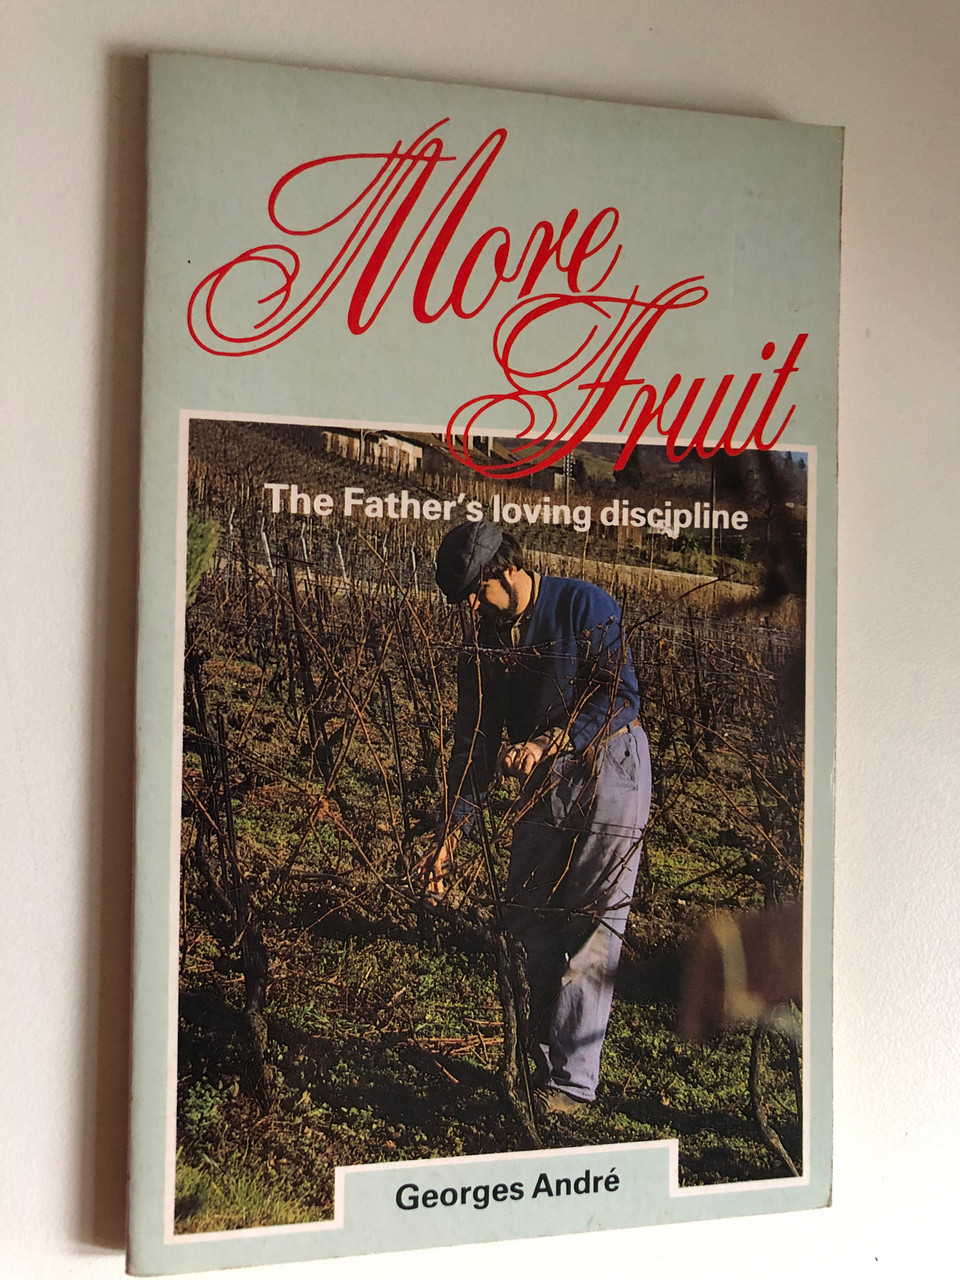 More_Fruit_The_Fathers_Loving_Discipline_by_Georges_Andre_J._Scales_Translator_Published_by_CHAPTER_TWO_London_England_2__54865.1690597357.1280.1280.JPG (960×1280)